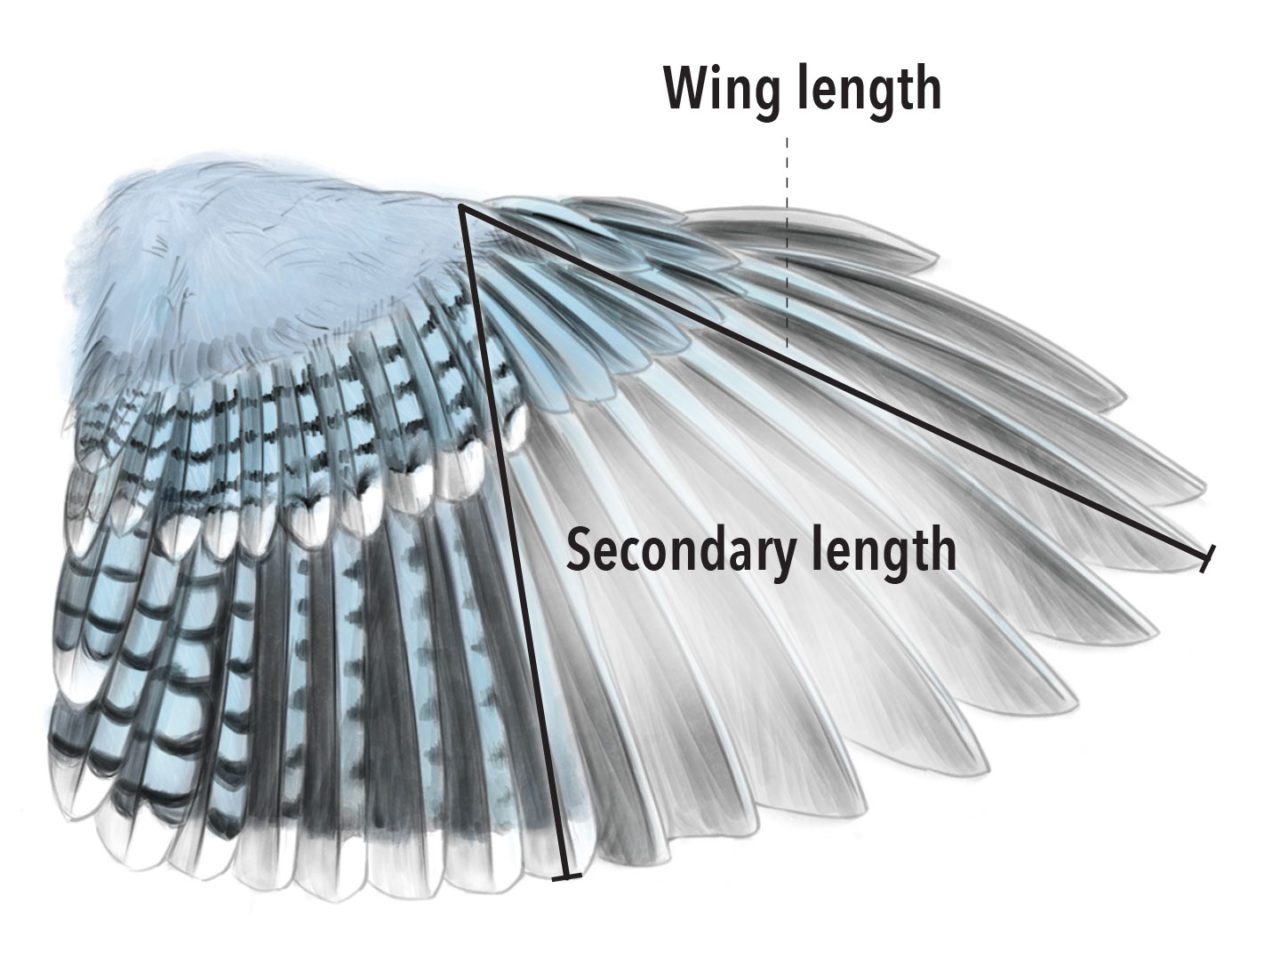 Illustration of a Blue Jay's wing showing wing and secondary length